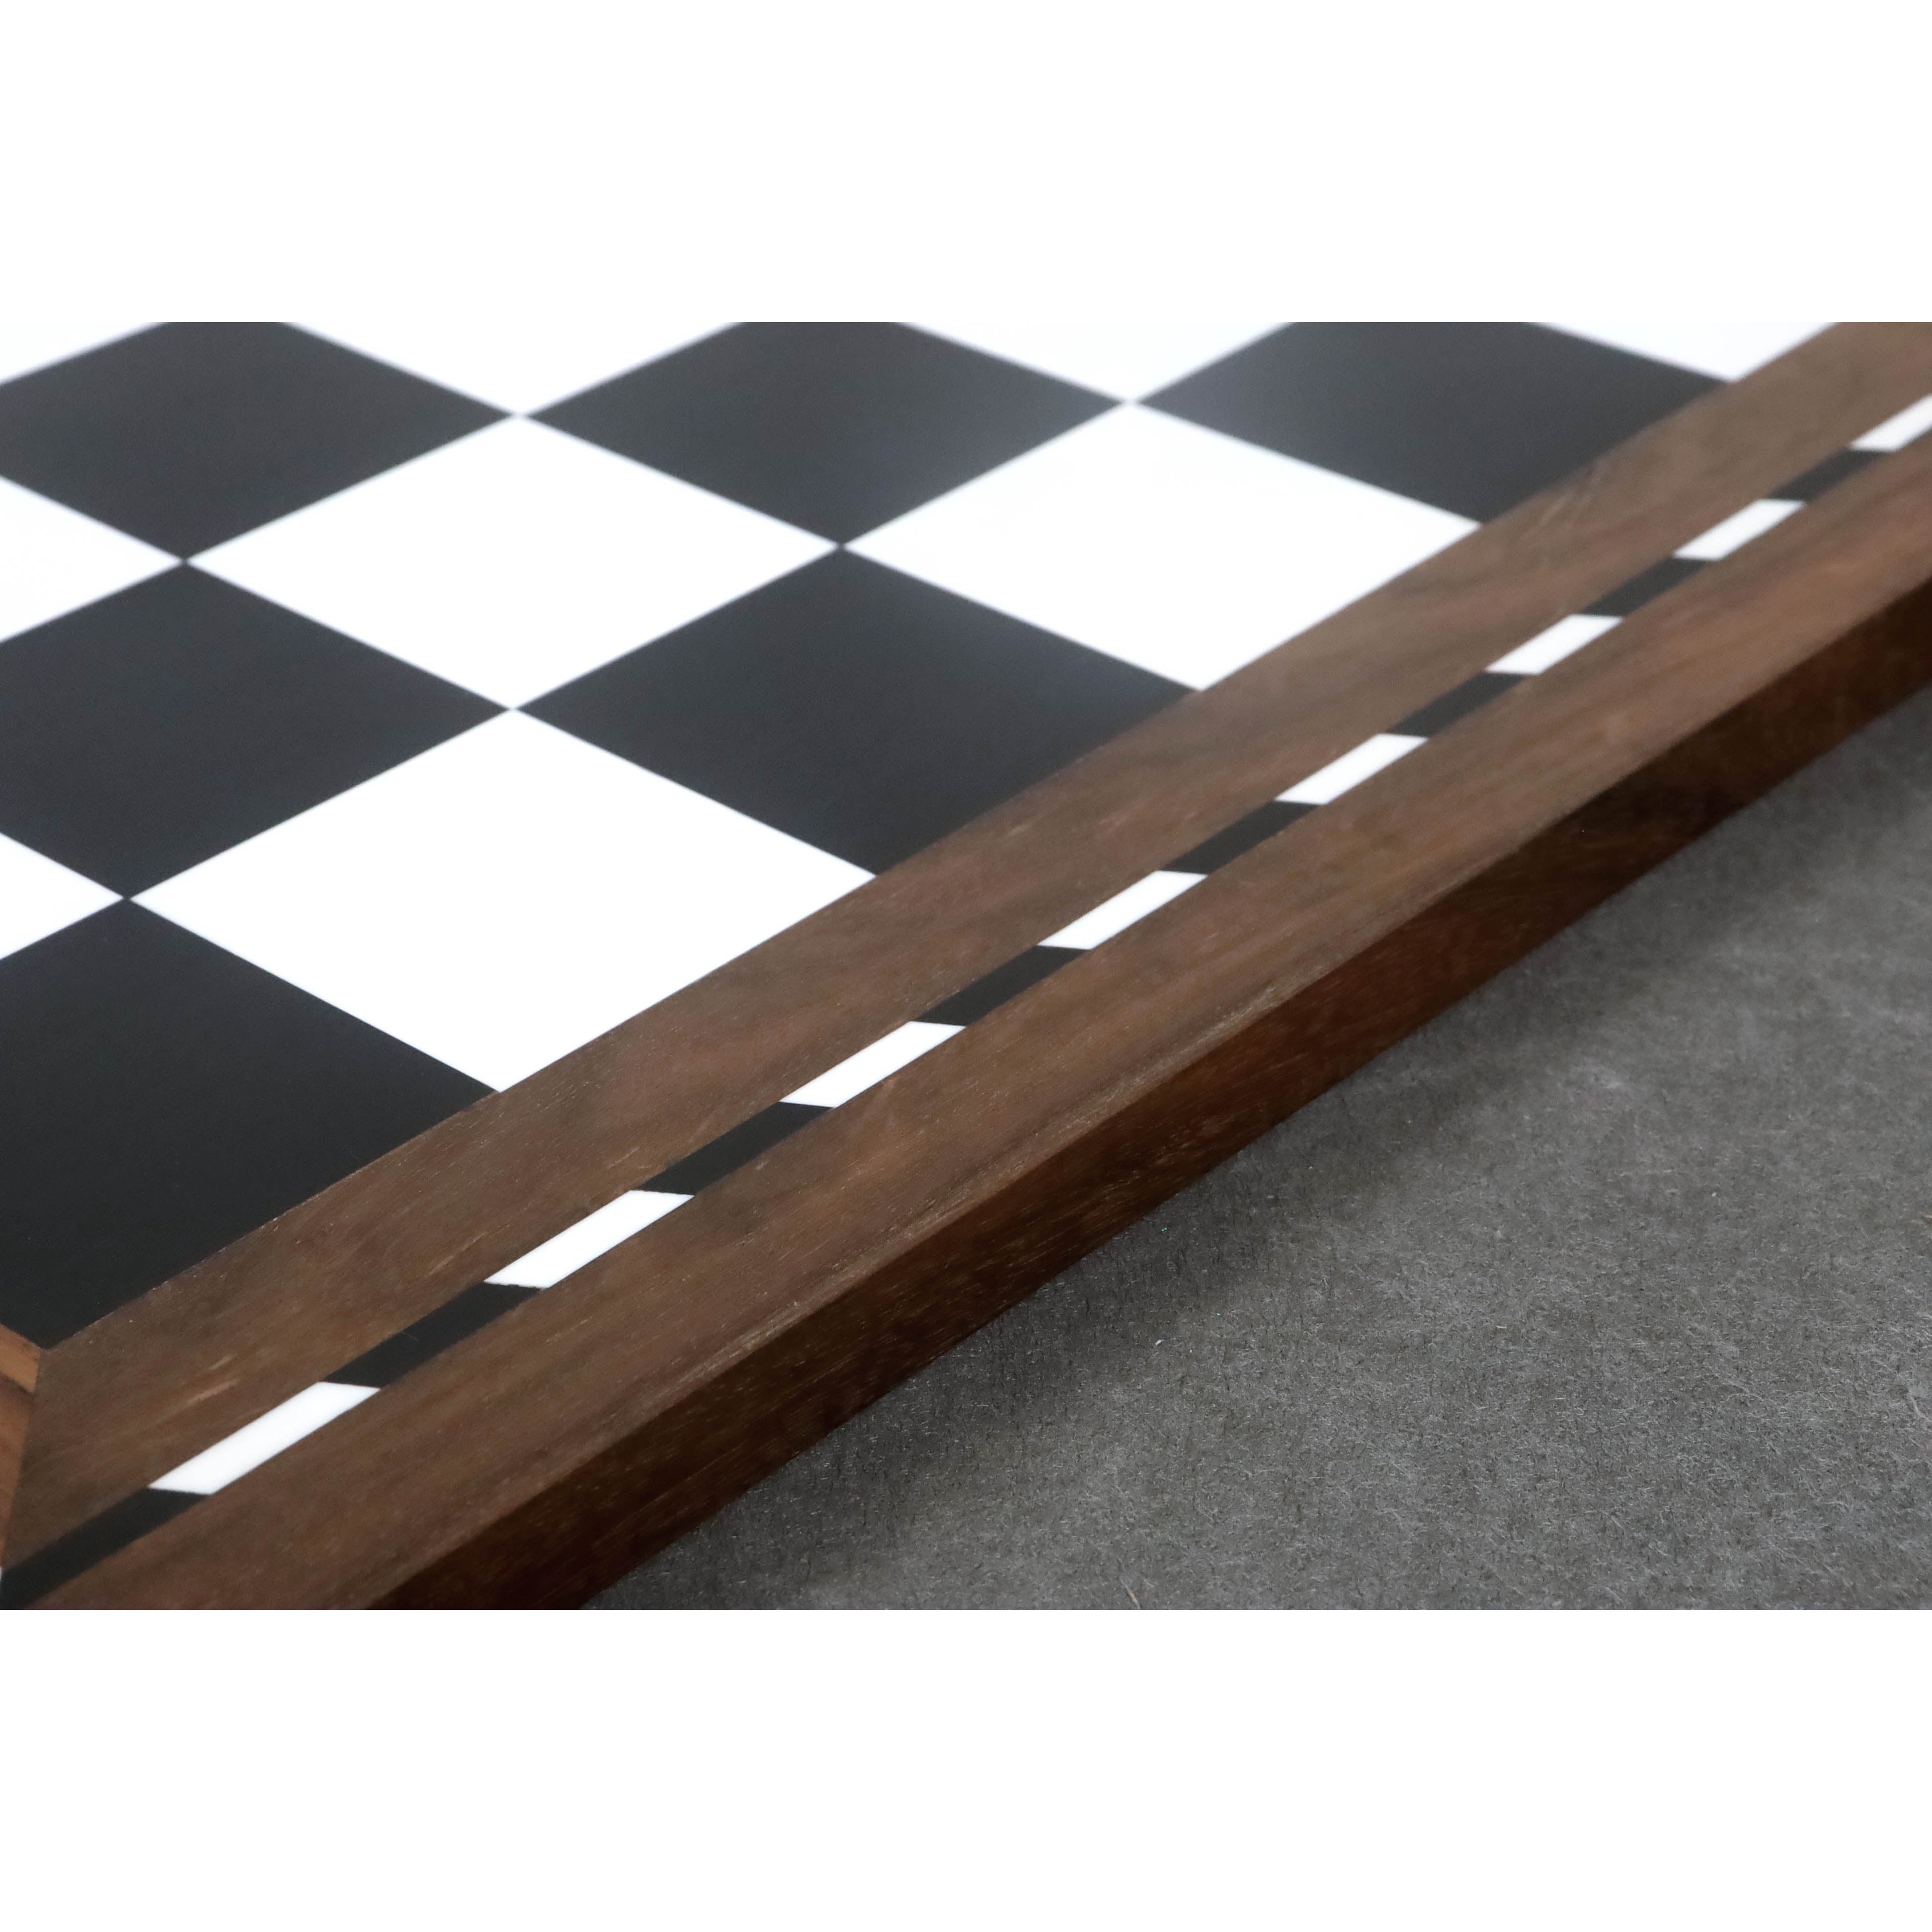 The Chess Online Shop, Foldable chess boards